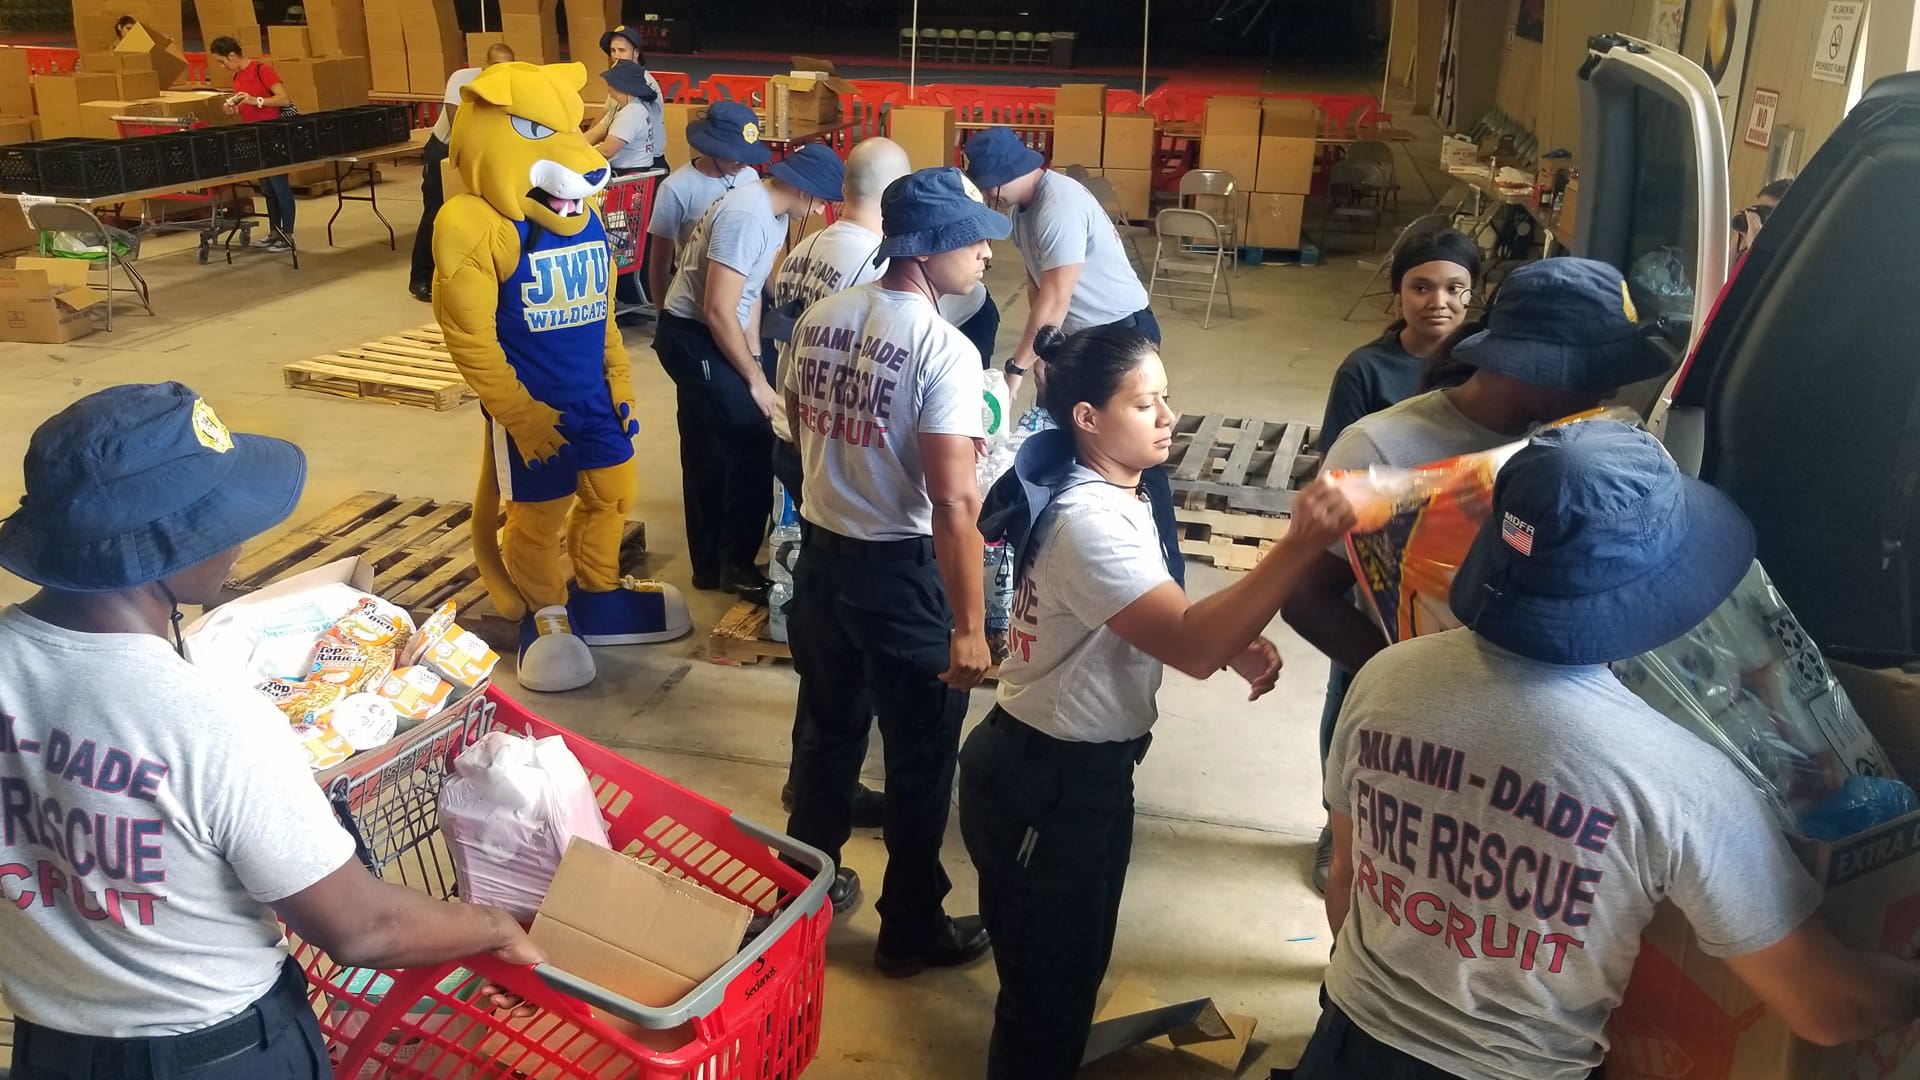 Volunteers worked to make sure donations got to their destination.